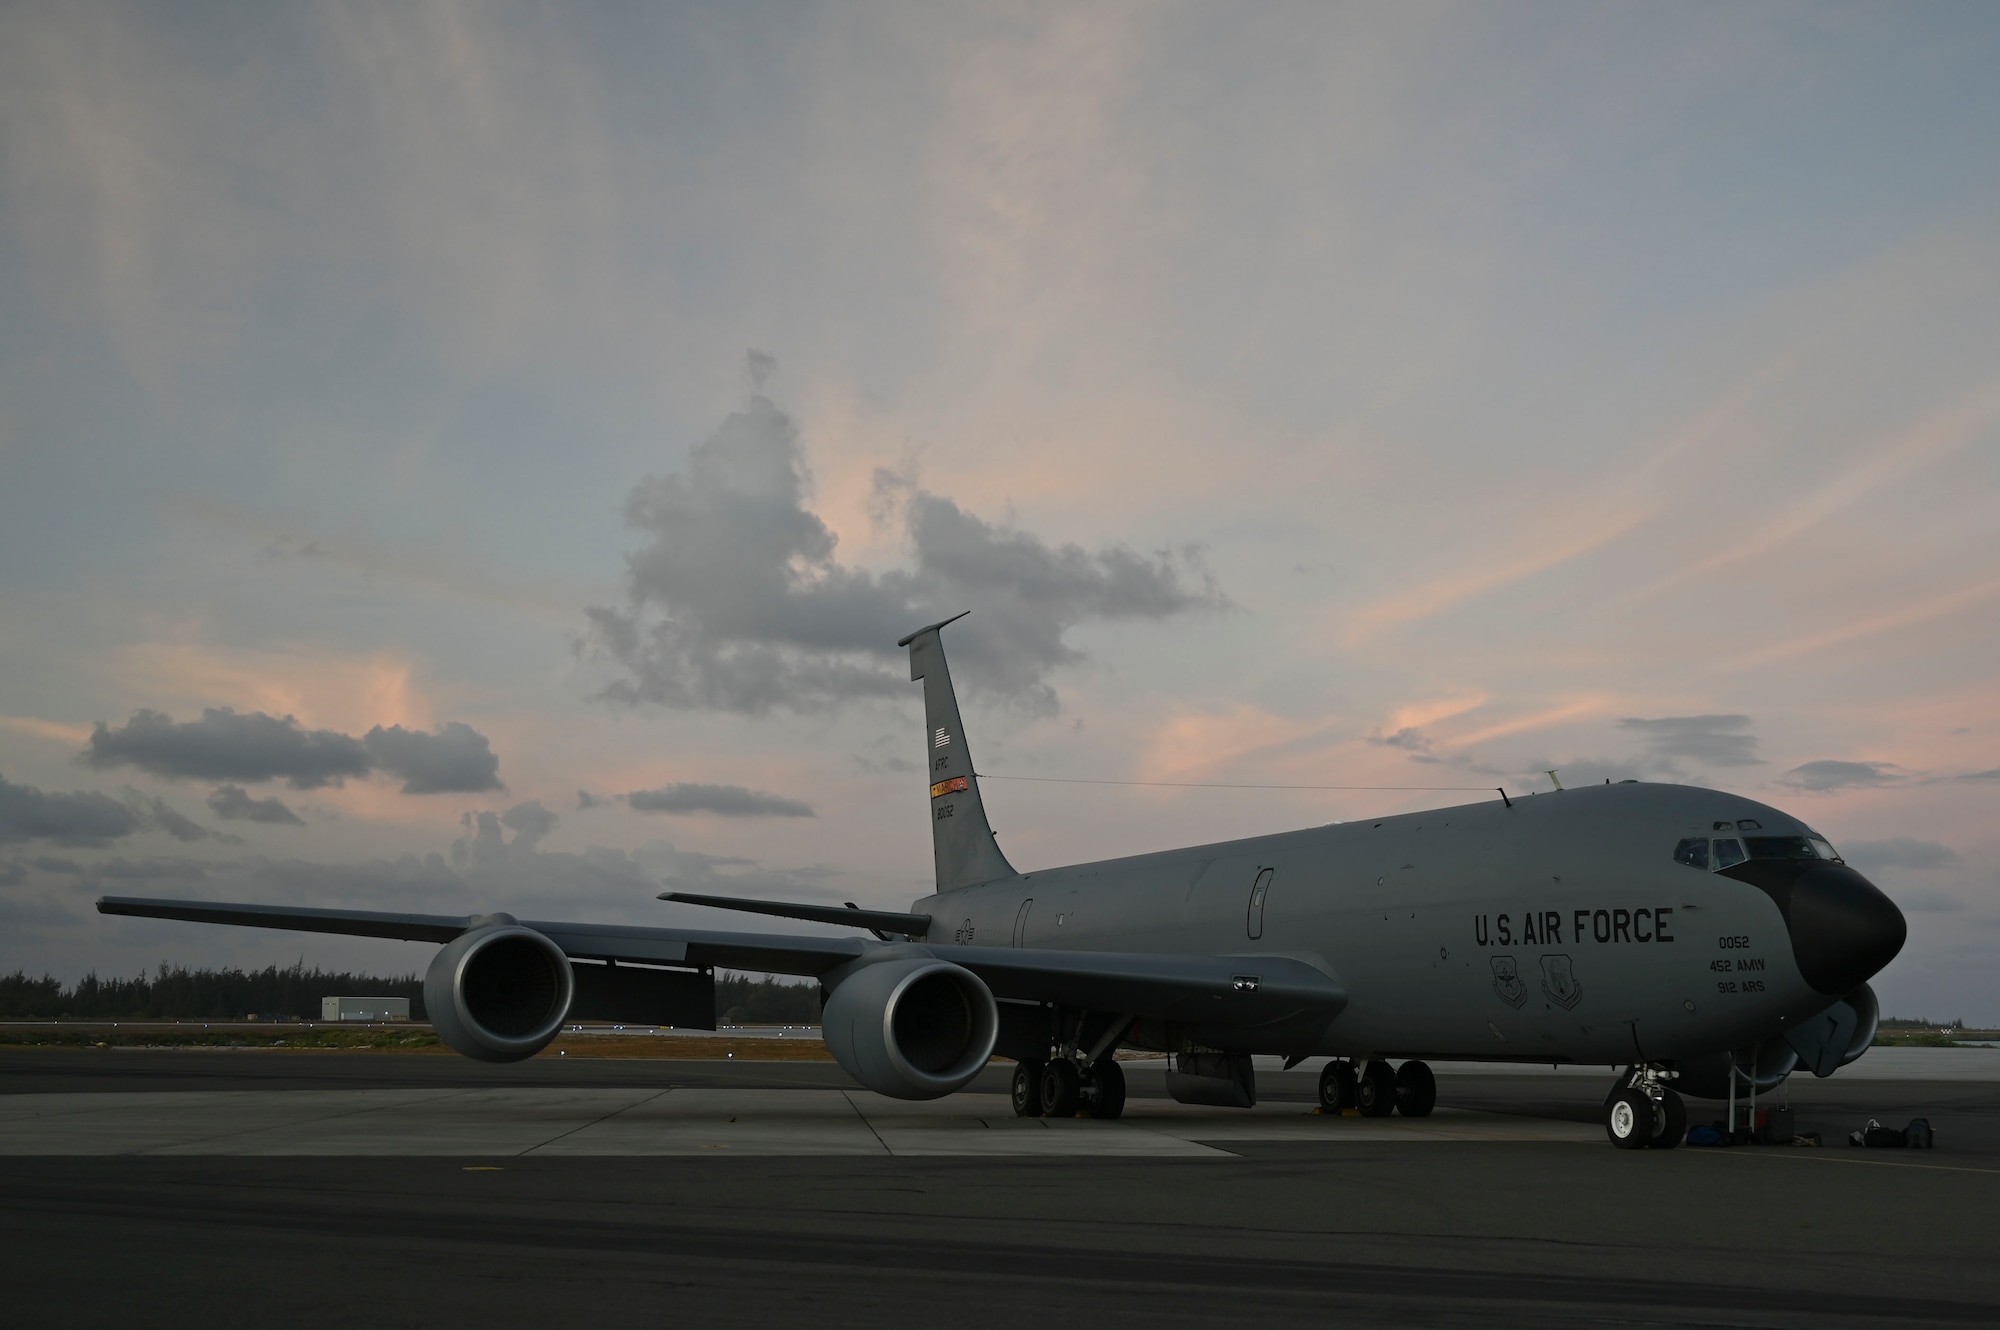 A 912th Air Refueling Squadron KC-135 from March Air Reserve Base, Calif., sits on the ramp at Wake Island Airfield awaiting the return flight to Joint Base Pearl Harbor-Hickam, Hawaii. Active duty pilots from the Air Reserve Squadron refueled A-10s en route to Wake Island Airfield and transported Special Warfare operators and mail for delivery from mainland Hawaii to the remote island as part of the AATC ACE exercise.